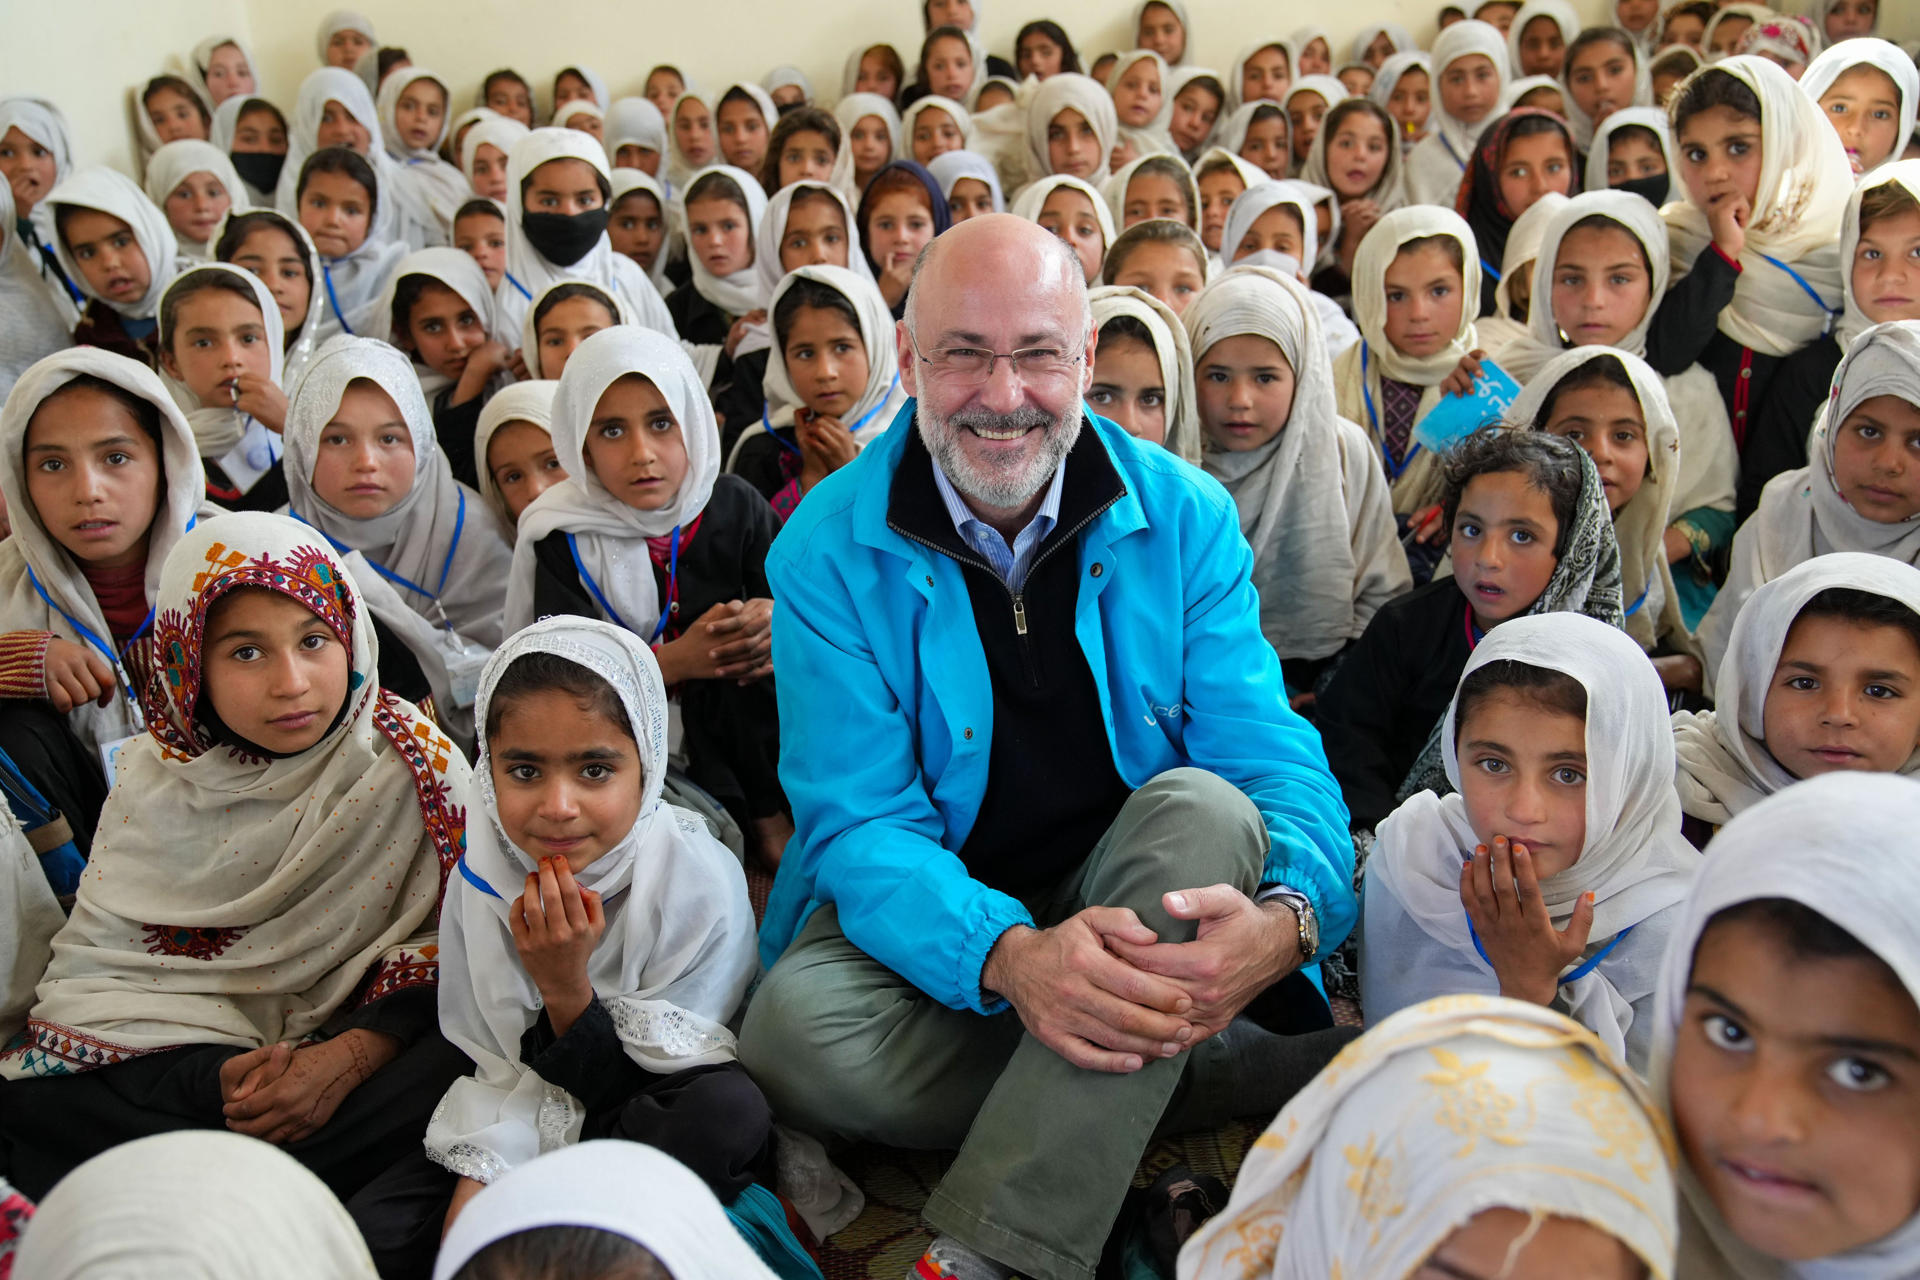 Personal photo provided by UNICEF representative in Afghanistan Fran Equiza showing him with schoolgirls in Afghanistan's Helmand province. EFE/UNICEFAfg/Fran Equiza